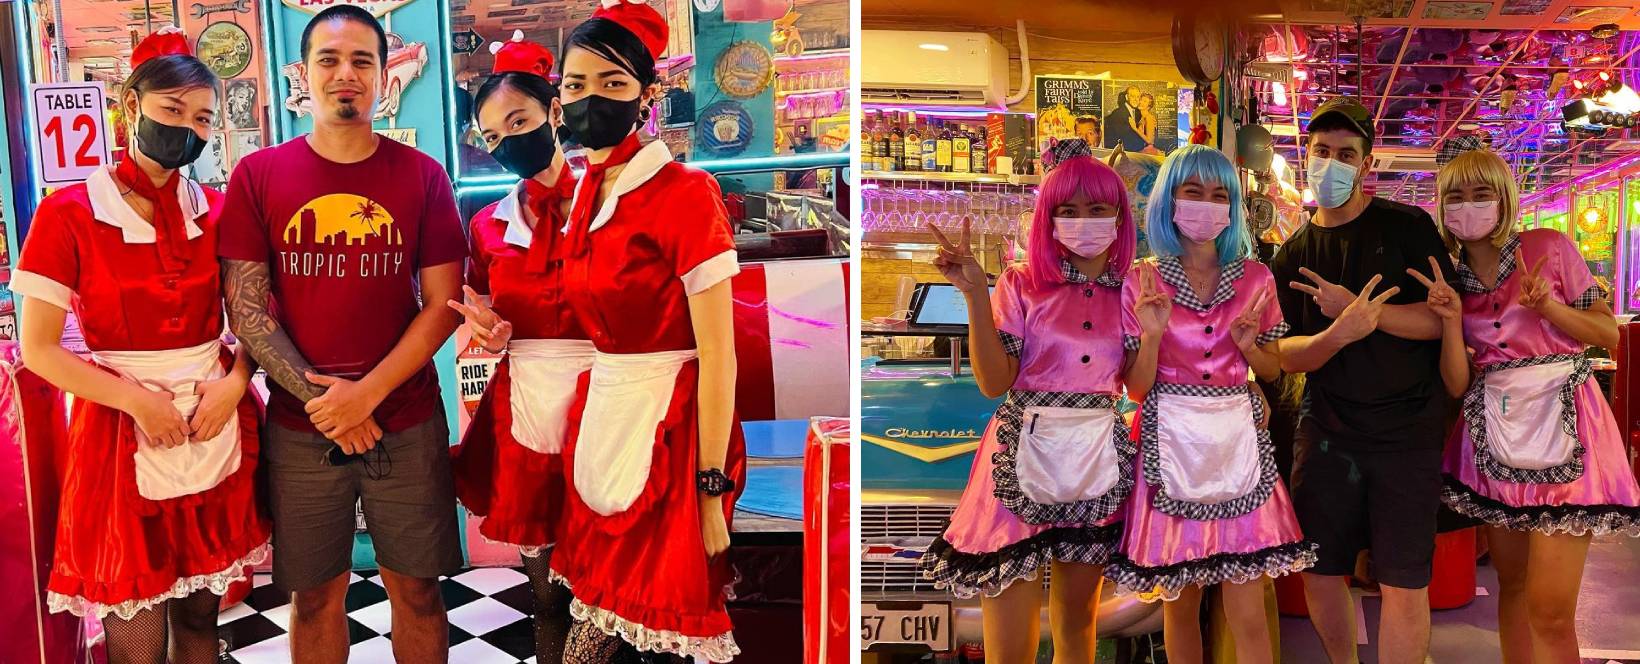 YOLO Retro Diner in Las Piñas - friendly staff with matching costumes